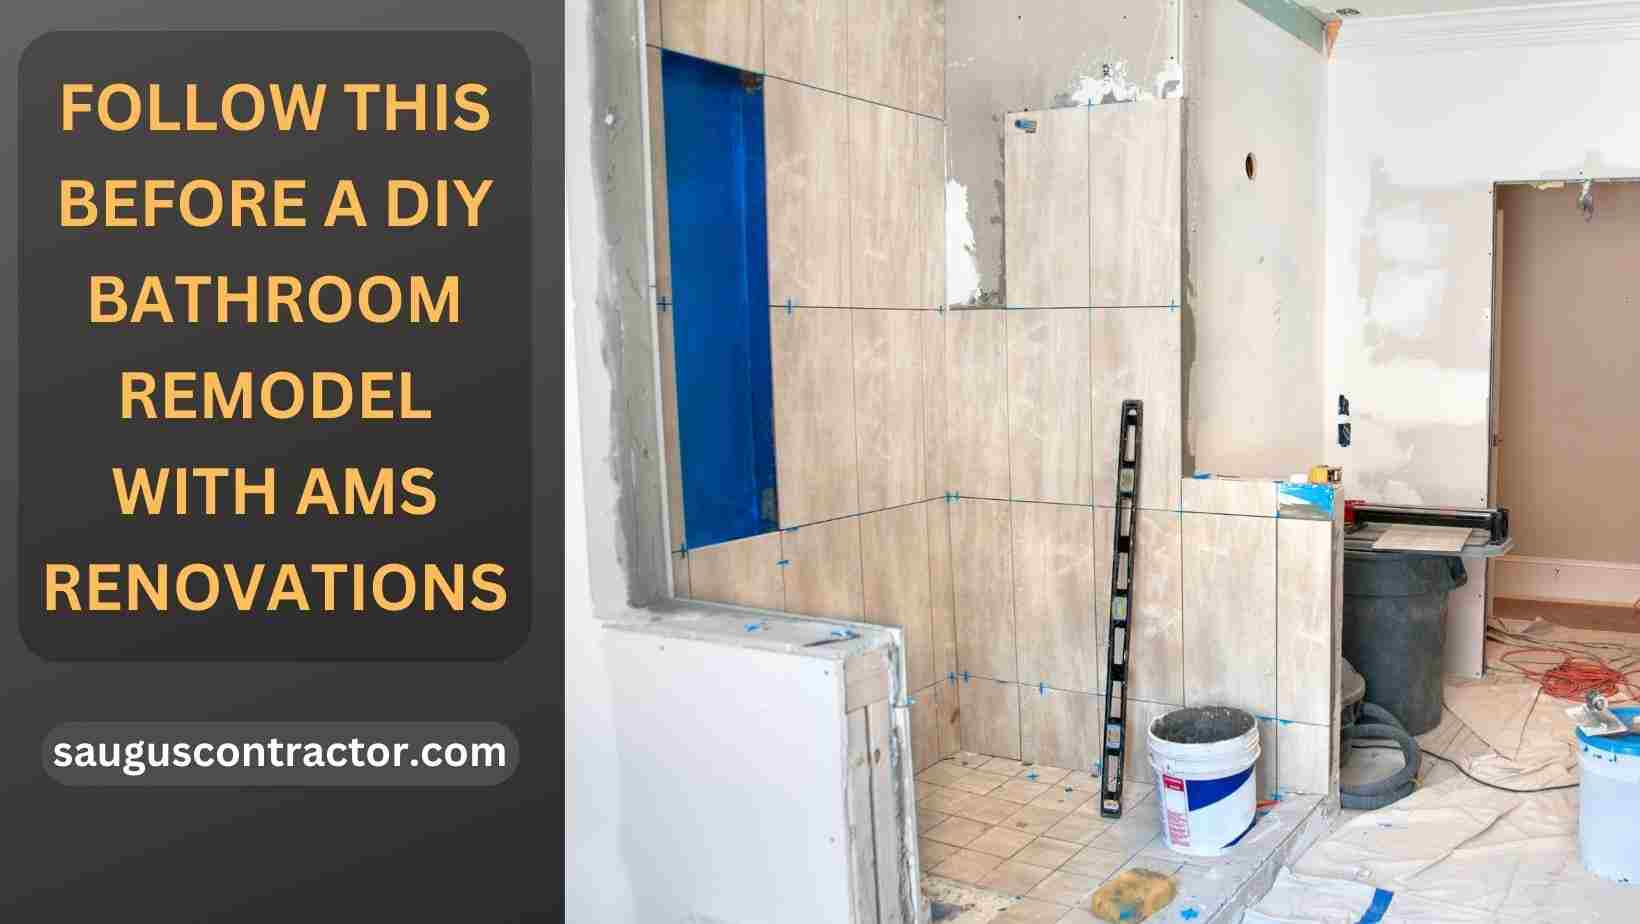 Follow This Before a DIY Bathroom Remodel with AMS Renovations